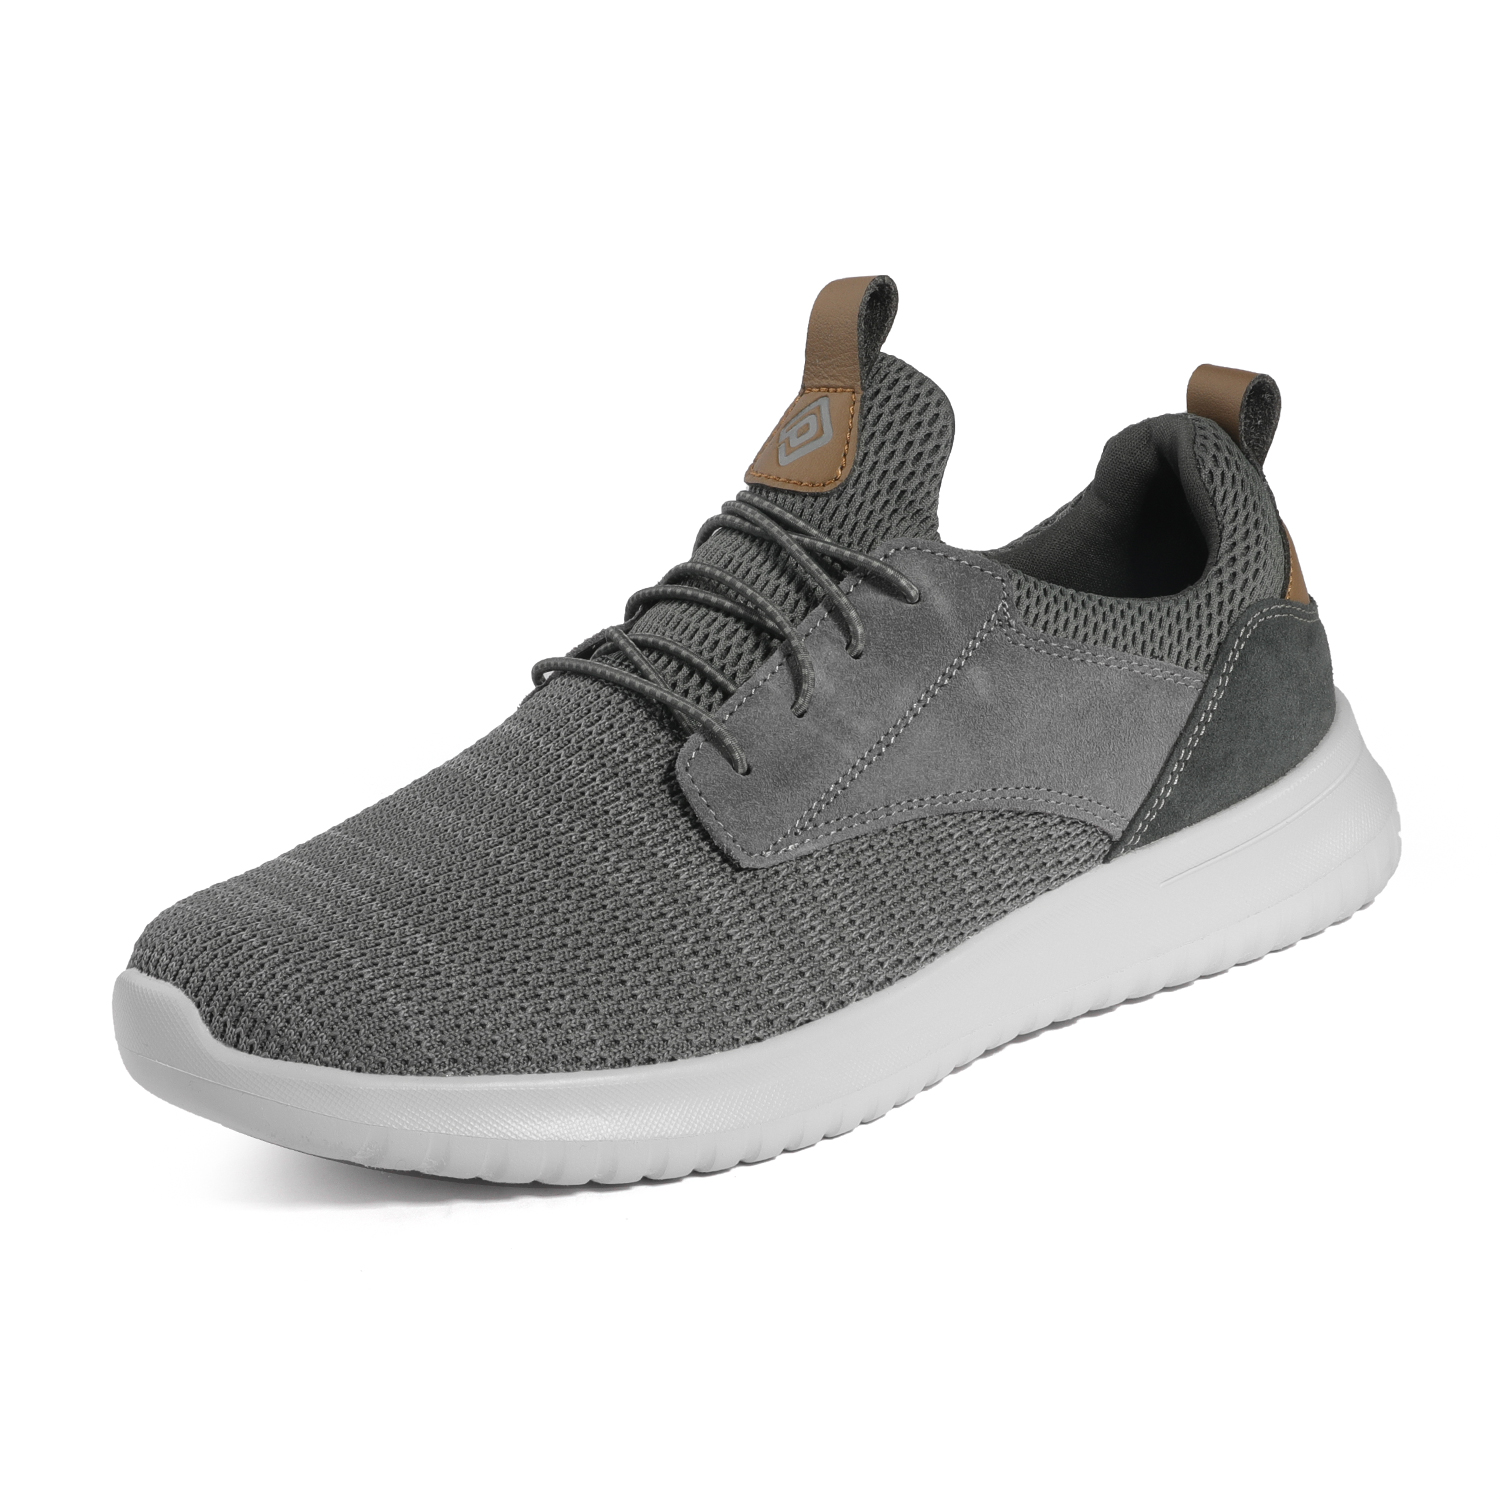 Bruno Marc Men's Casual Sneakers Outdoor sports shoes Comfort Running Athletic Shoes WALK_WORK_01 GREY Size 12 - image 1 of 3